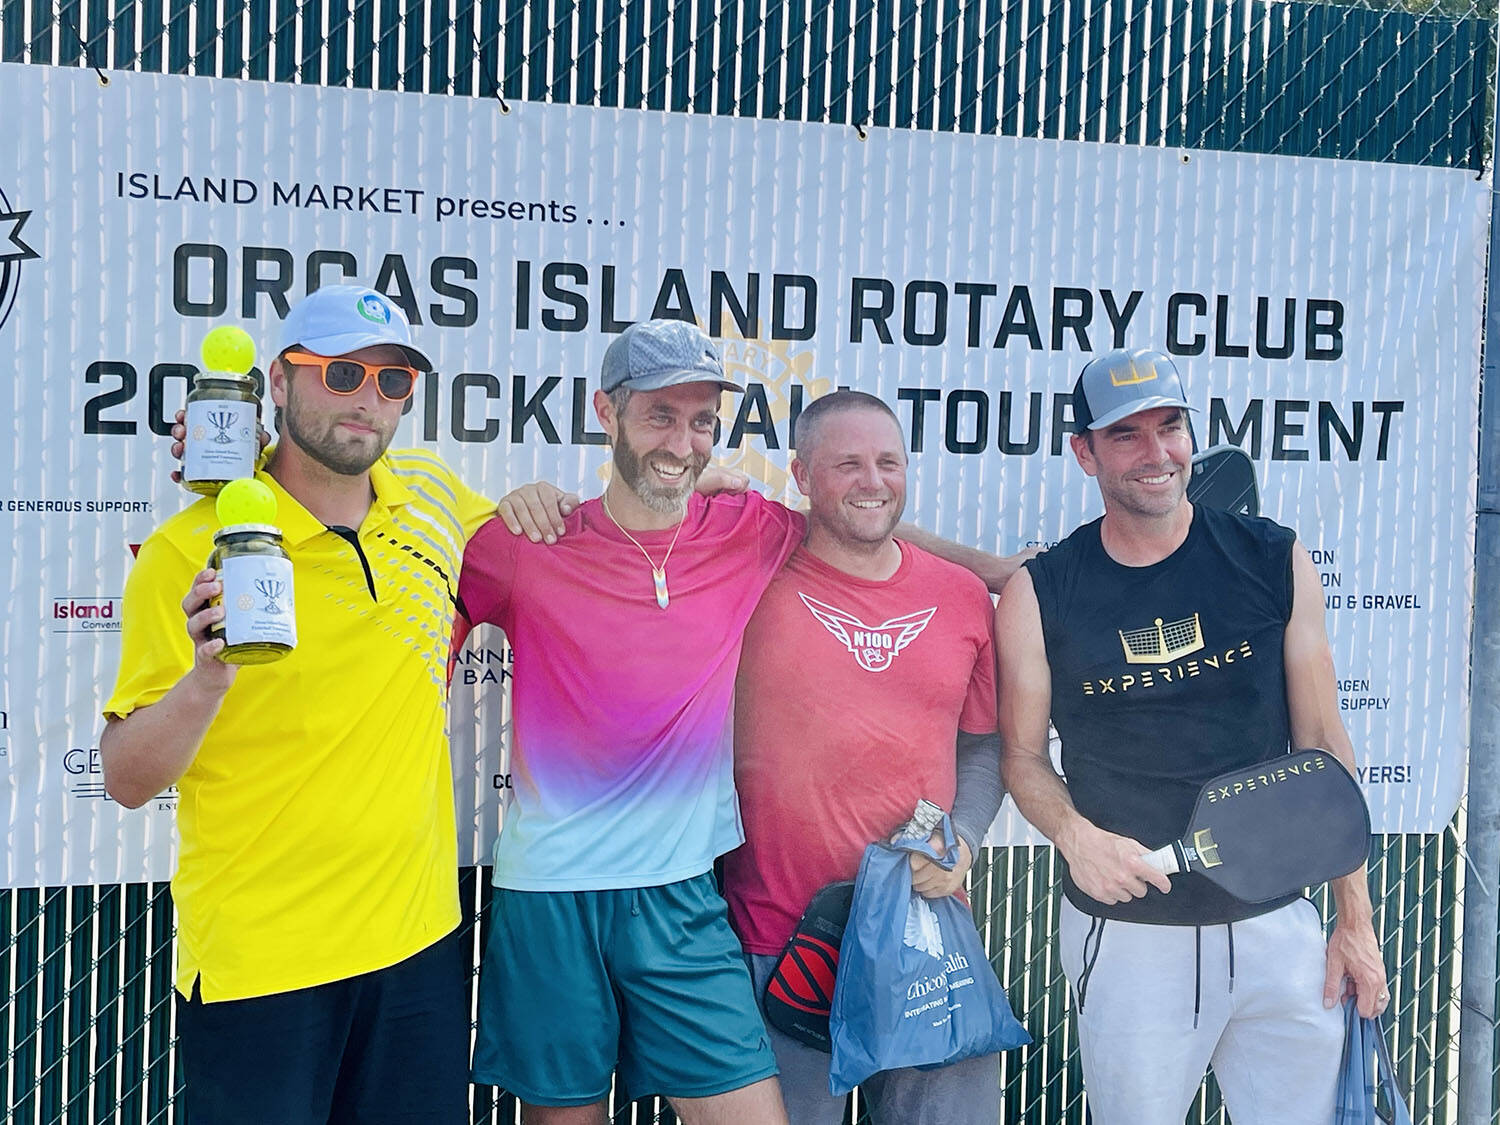 Group A Men’s Doubles finishers: Michael Harlow and Valerie Alexandov (second place), and Nigel Oswald and Jemuel Morris (first place)/CONTRIBUTED PHOTO